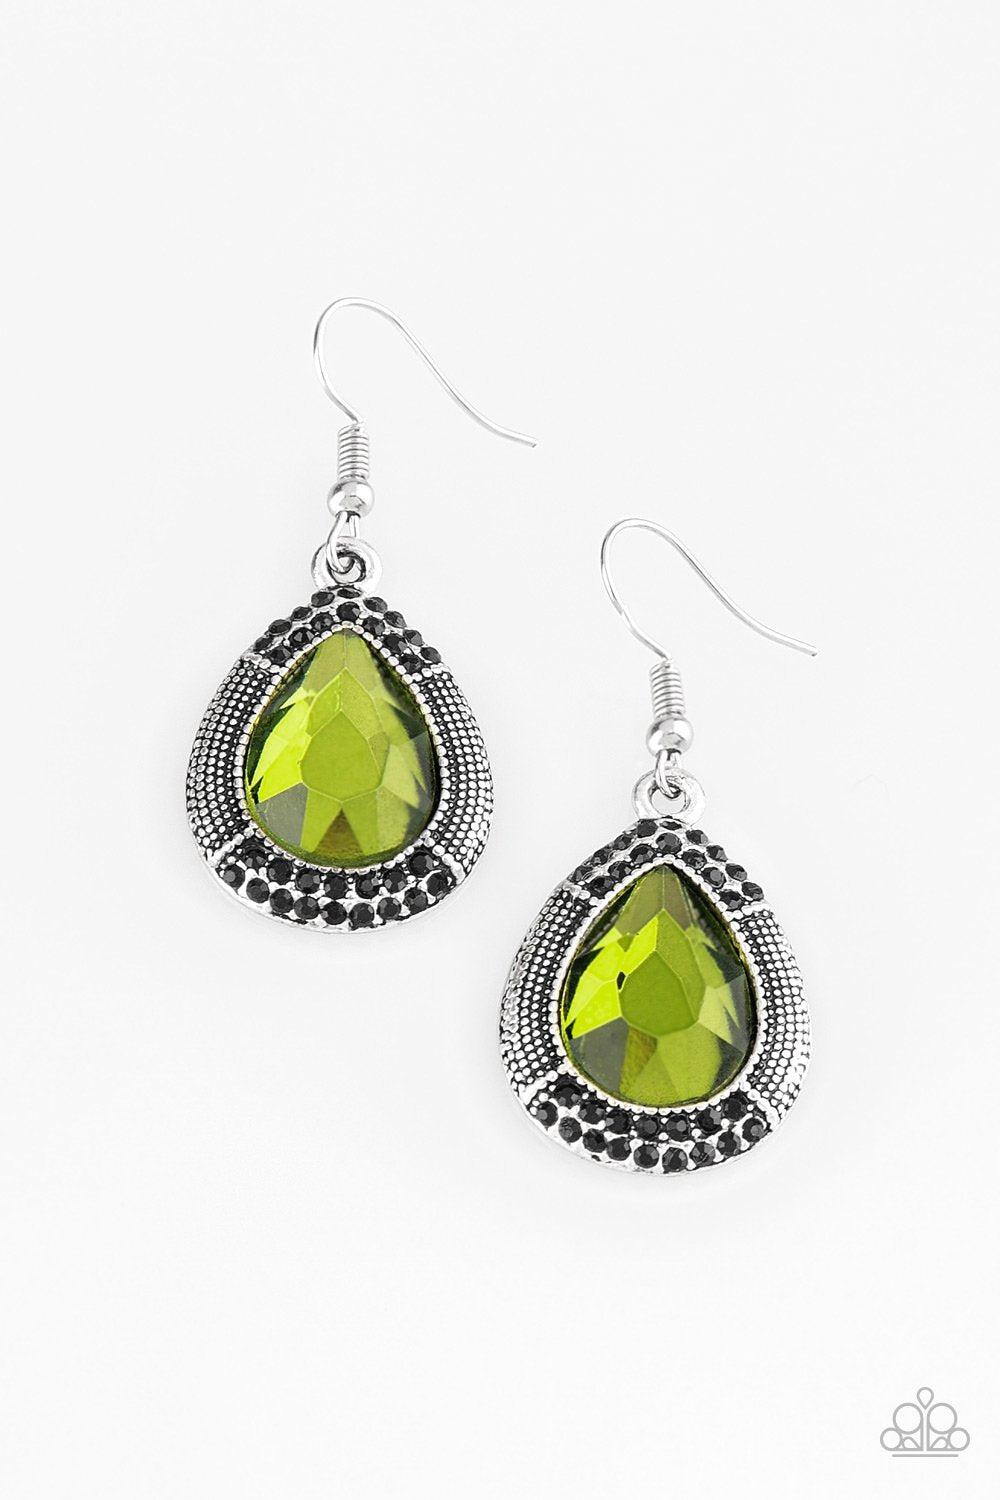 Grandmaster Shimmer Green Gem Earrings - Paparazzi Accessories-CarasShop.com - $5 Jewelry by Cara Jewels